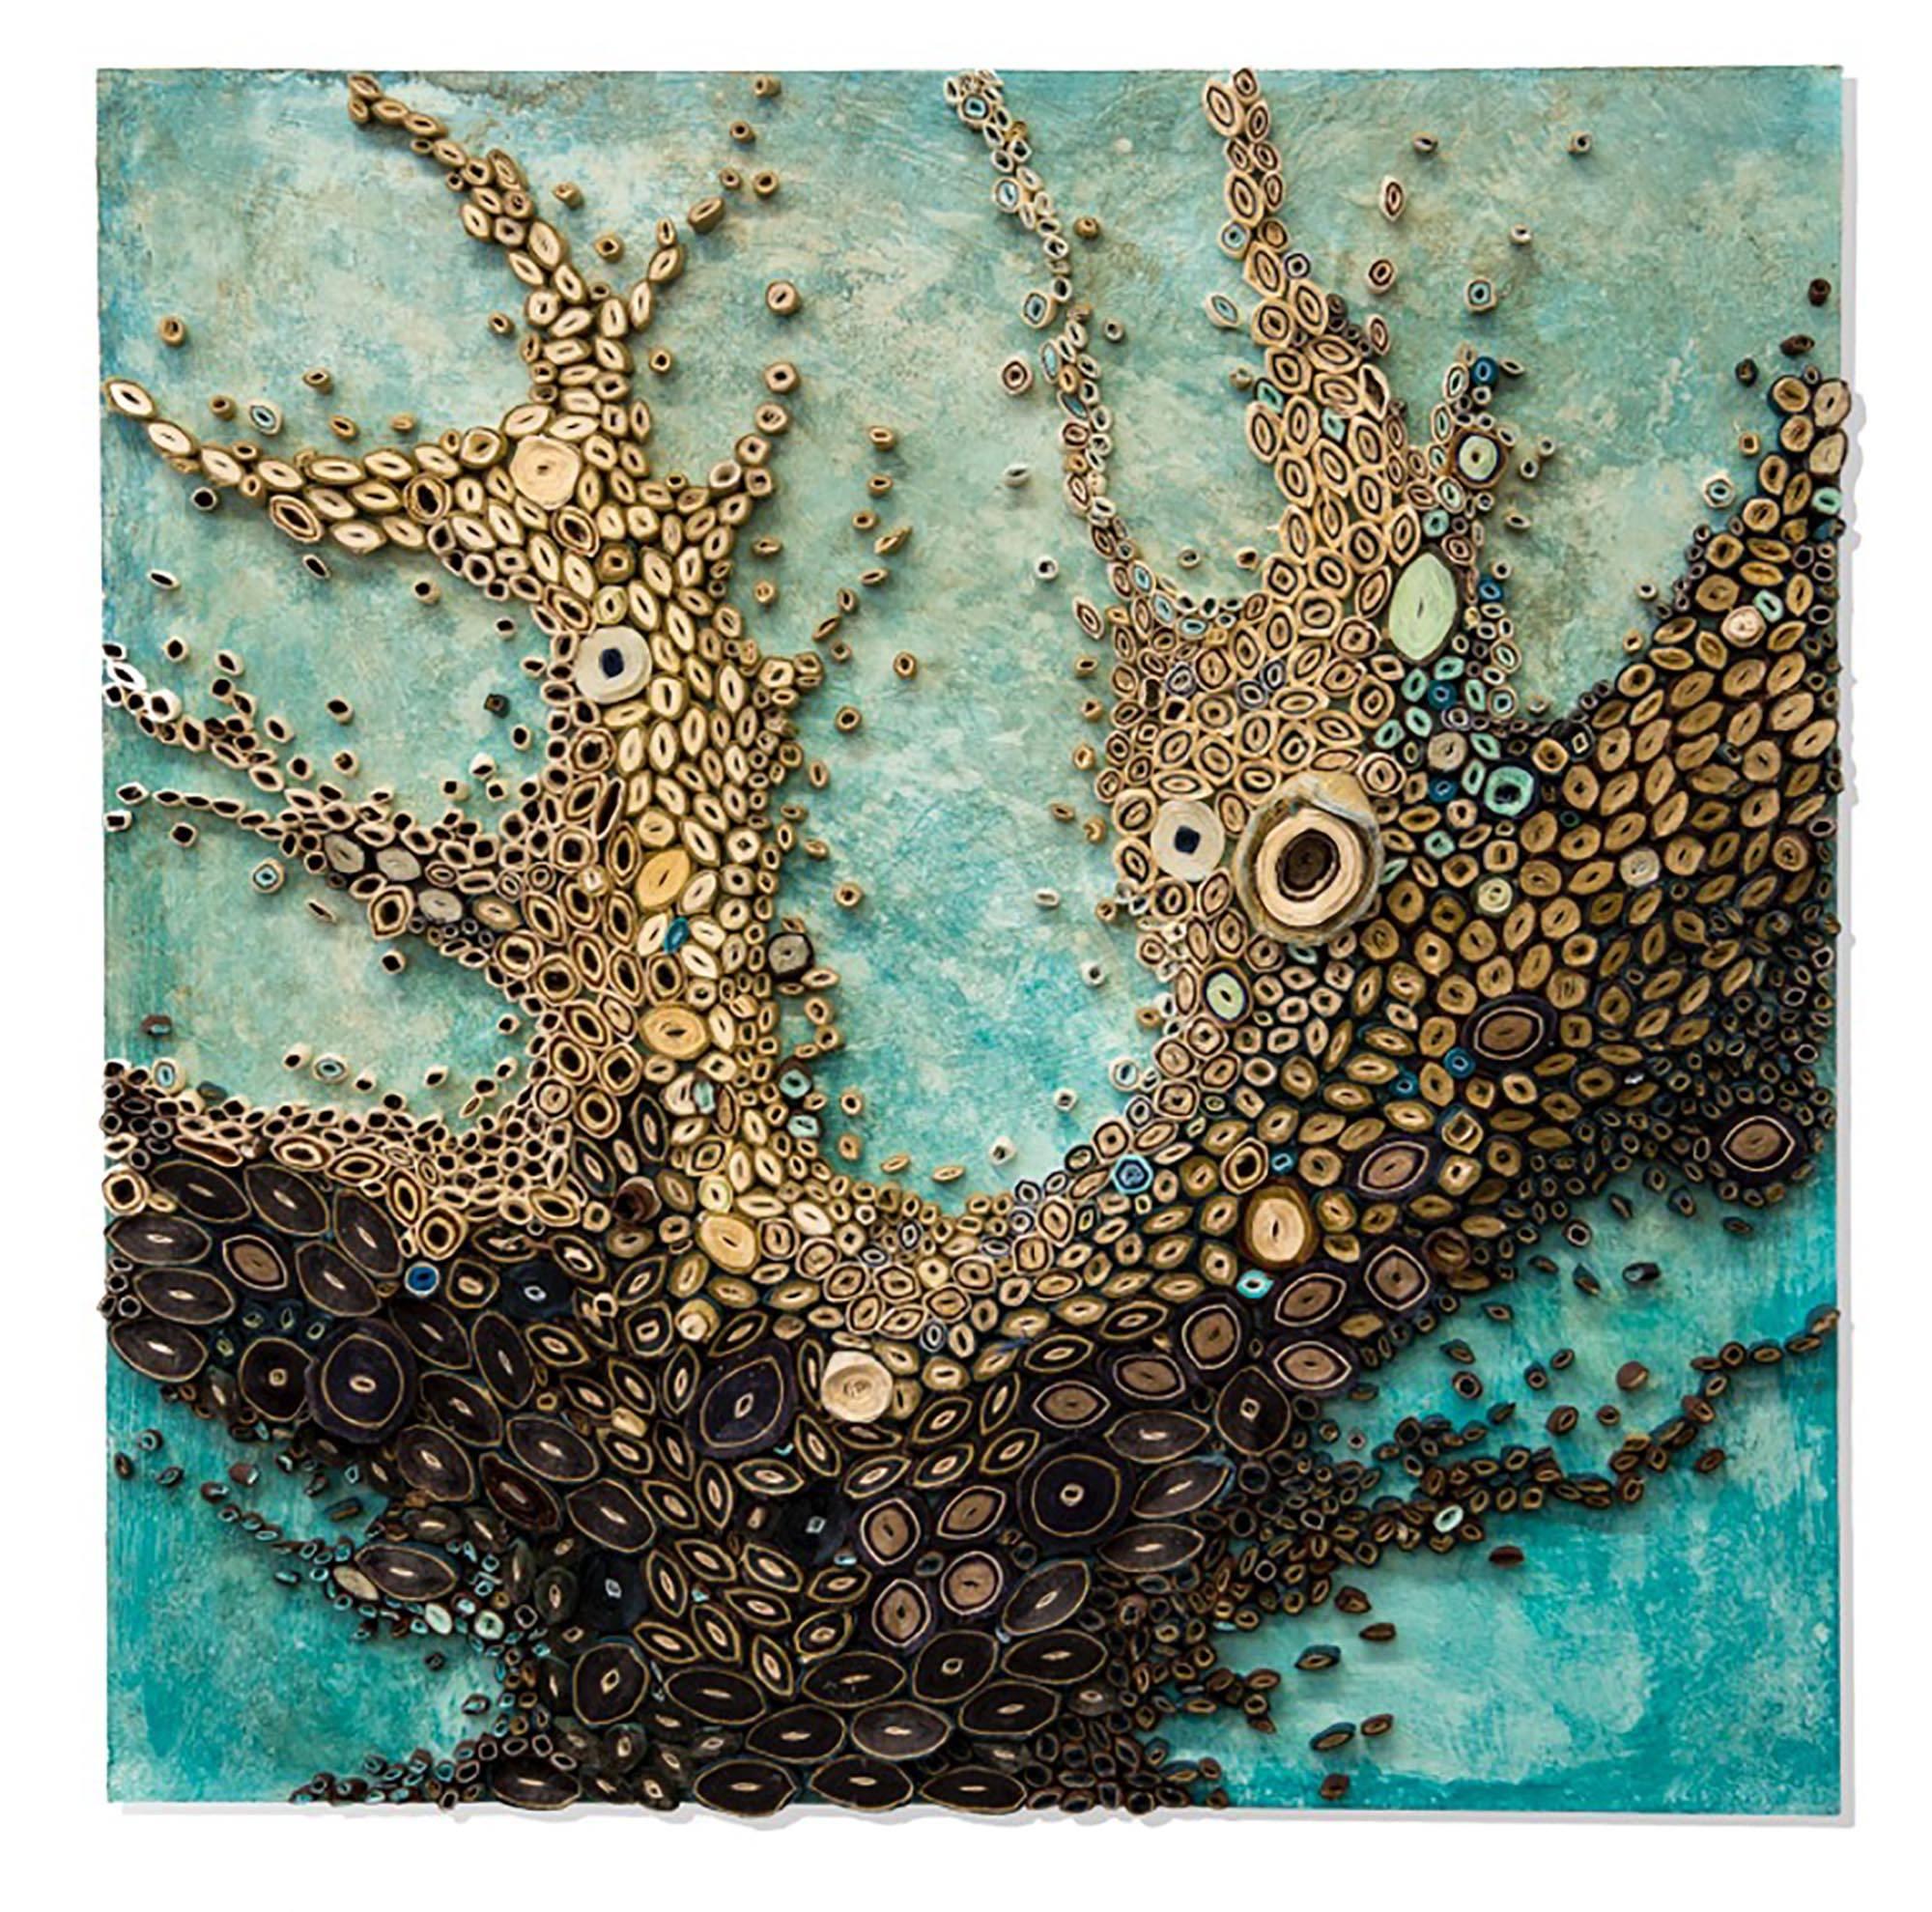 Celadon Roots 3D paper work - Mixed Media Art by Amy Genser